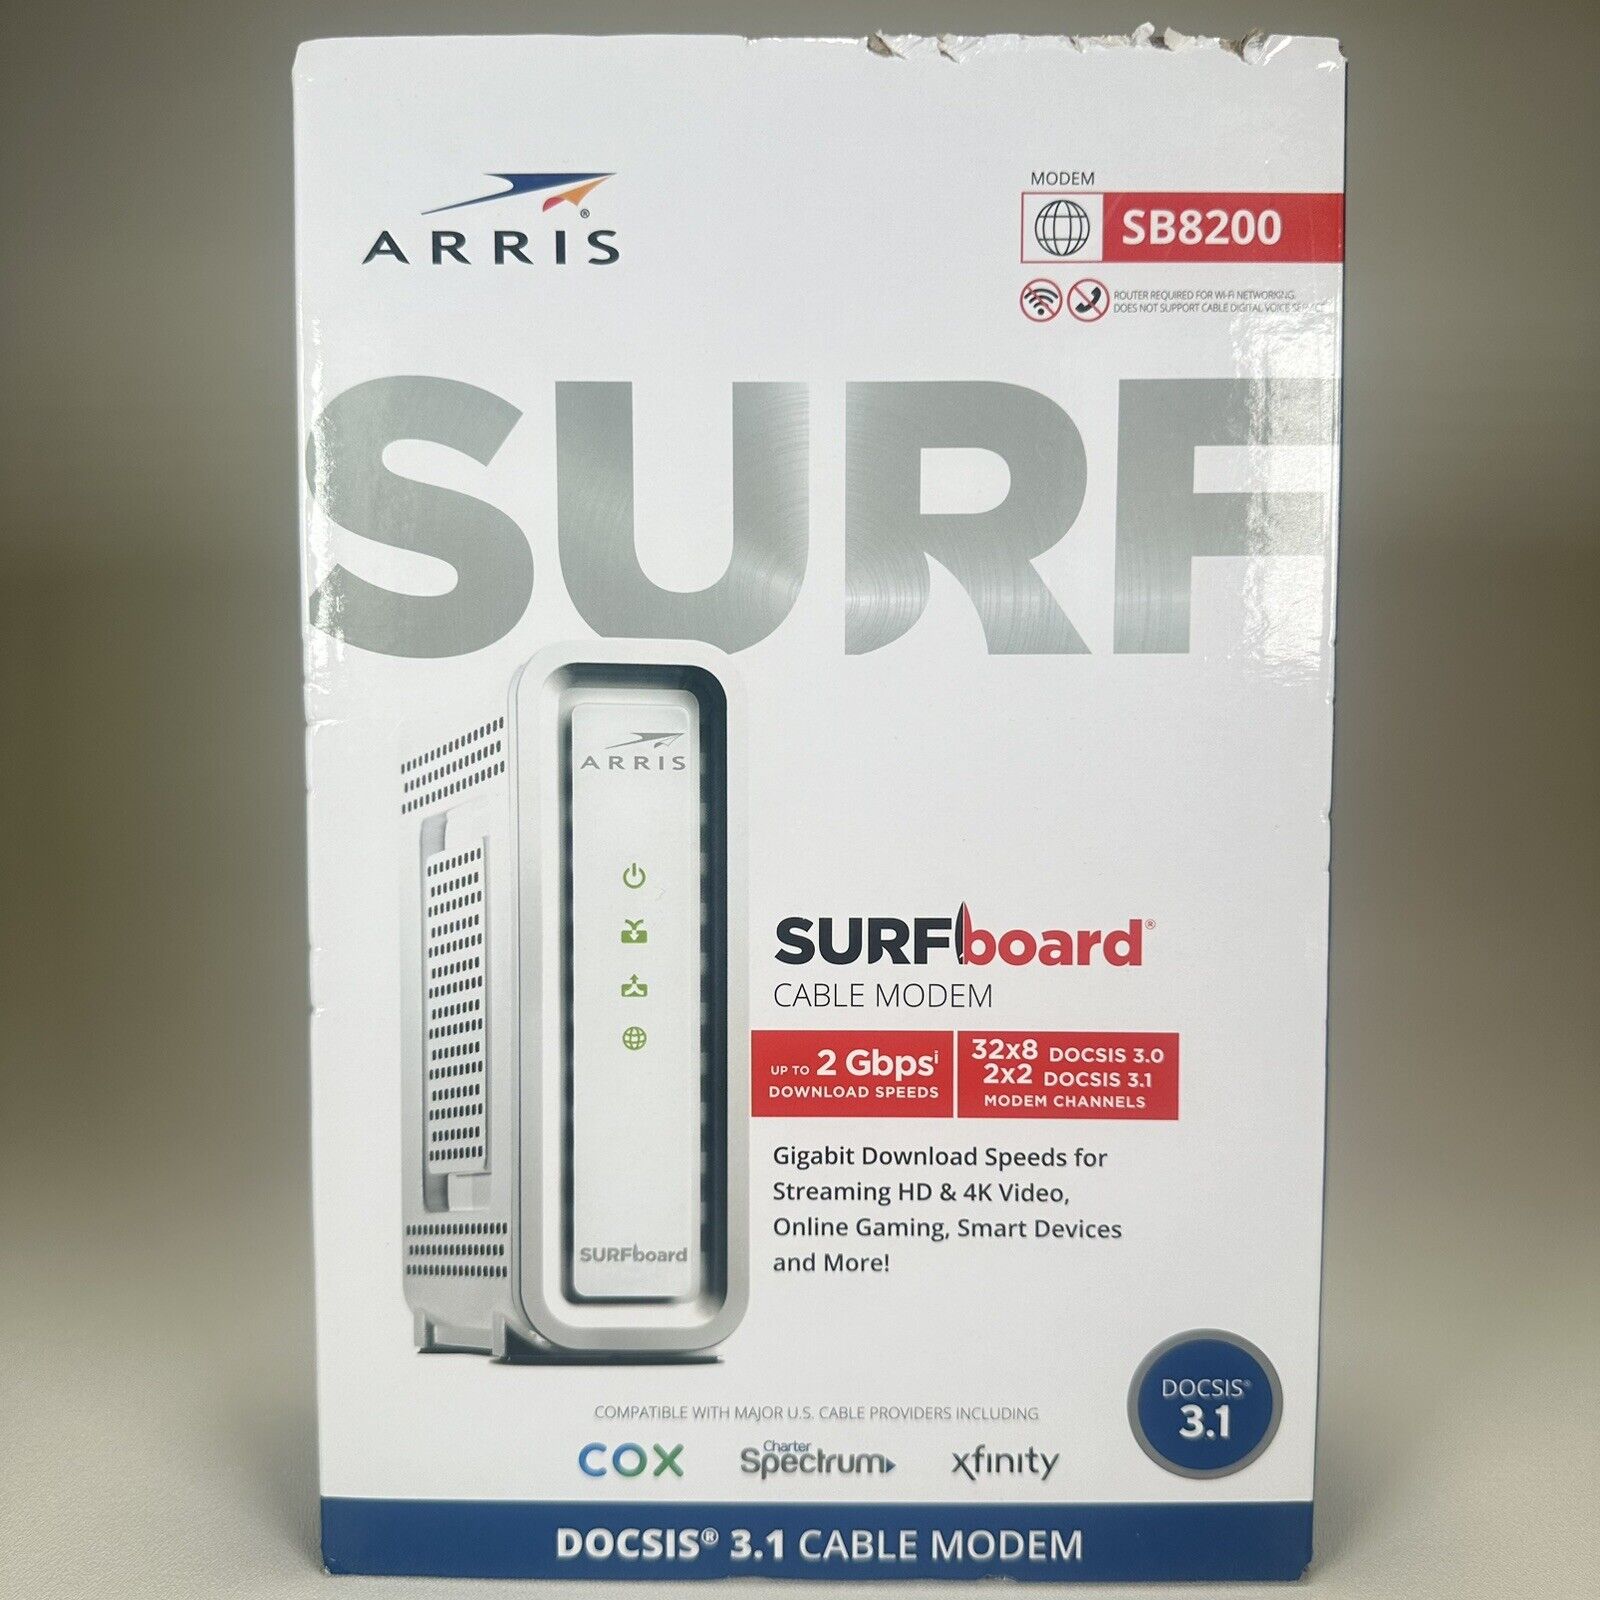 ARRIS SURFboard SB8200 DOCSIS 3.1 10 Gbps Cable Modem Brand New Factory Sealed